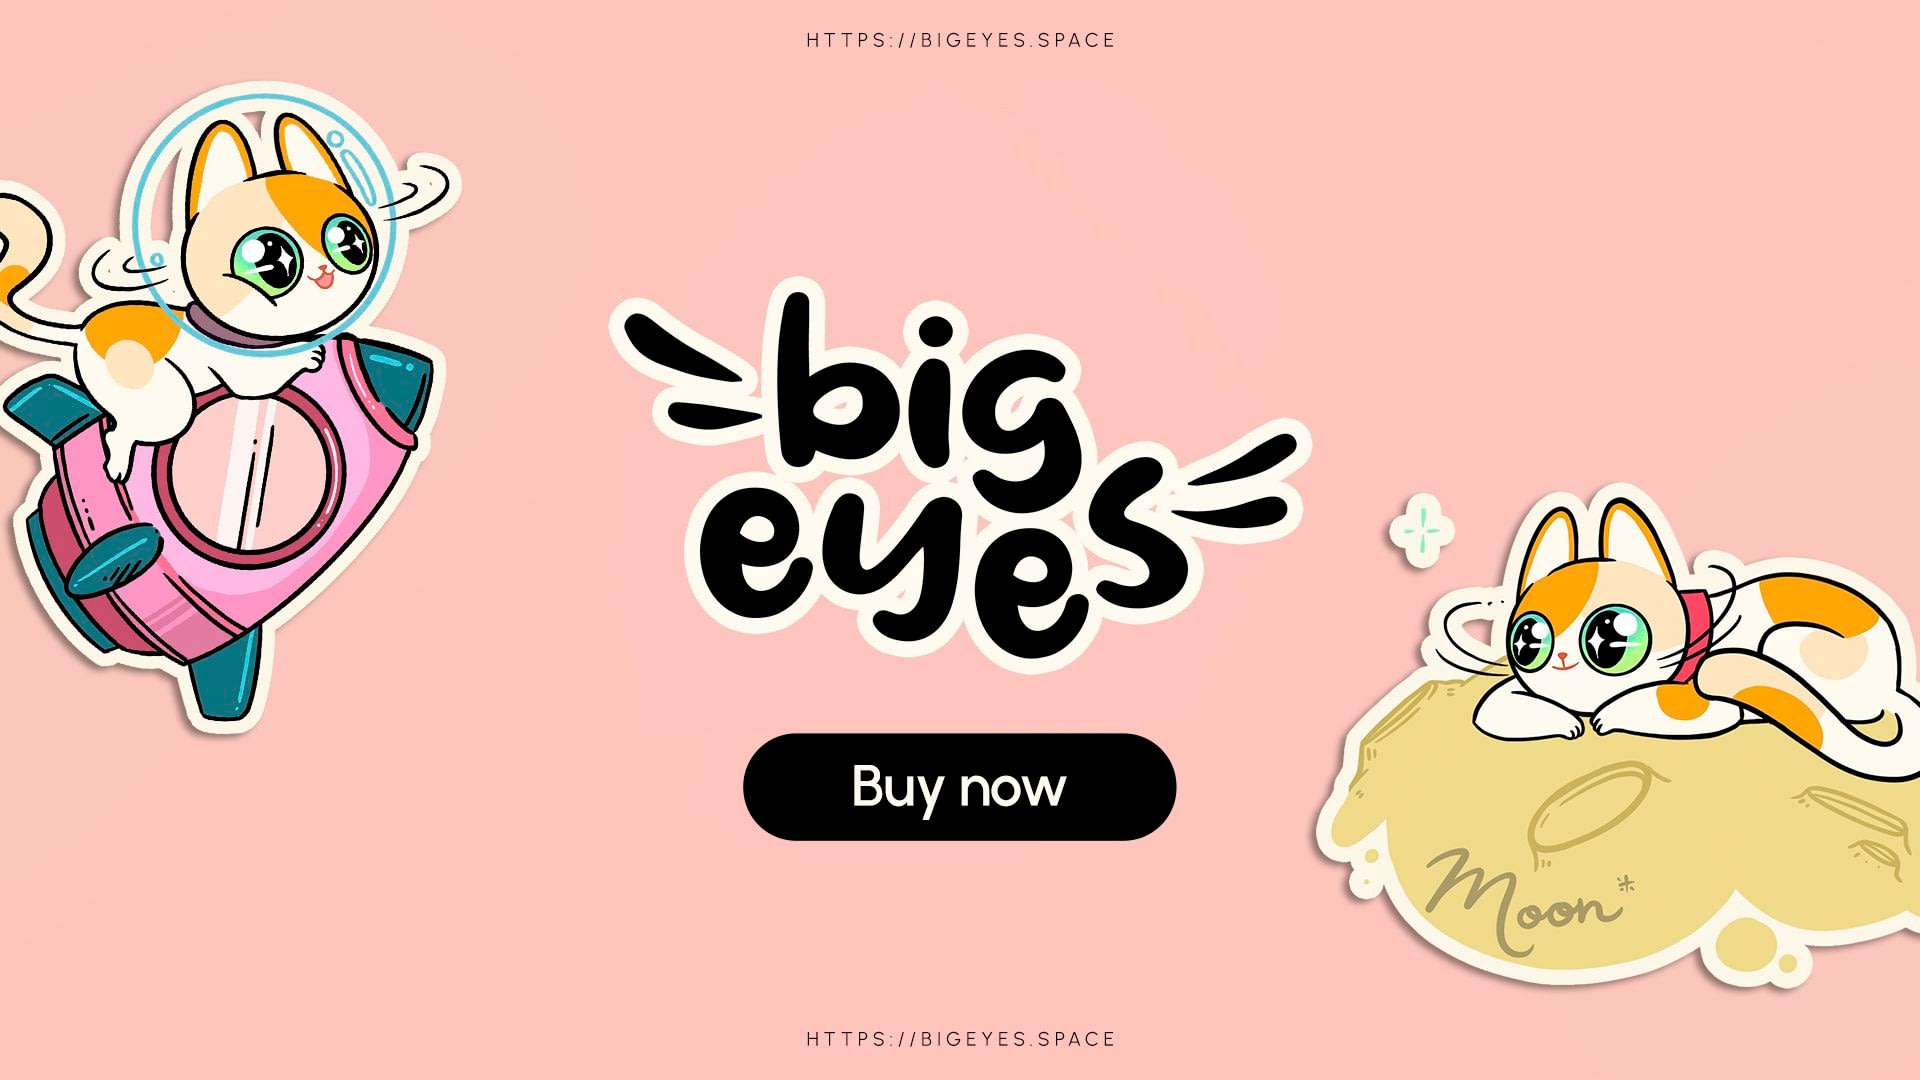 Big Eyes and Dogecoin Continue To Hit Milestones Despite Subtle Rivalry